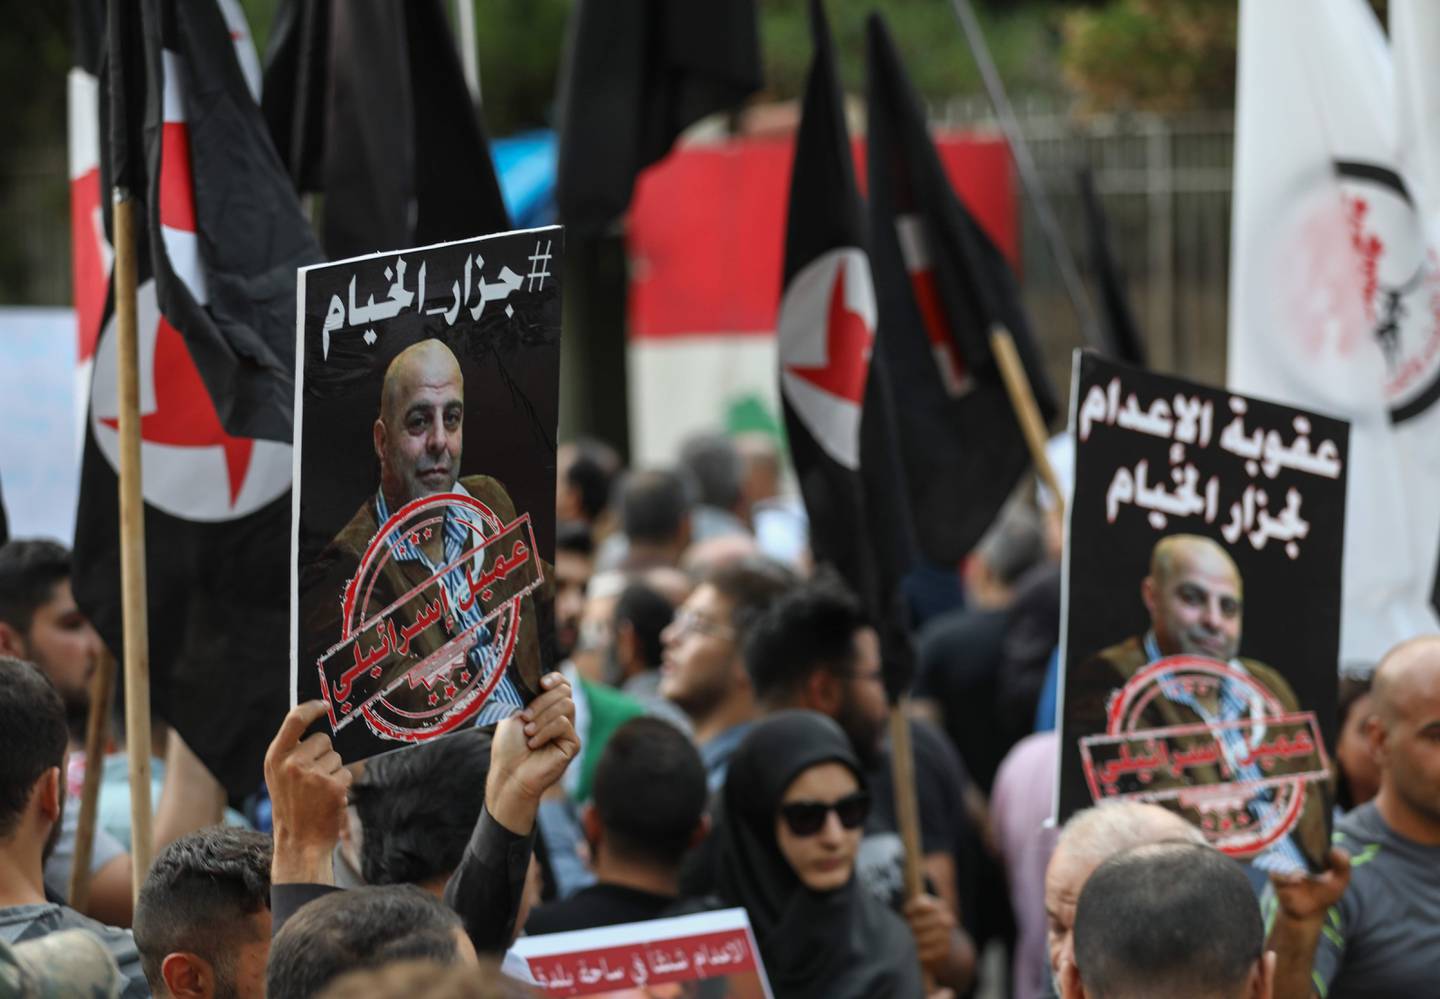 Former detainees of the pro-Israel South Lebanon Army (SLA) militia hold posters depicting former SLA member Amer al-Fakhoury during a demonstration denouncing his return and entry outside the Justice Palace in the Lebanese capital Beirut on September 12, 2019. Lebanon has detained Fakhoury, a senior warden in the notorious SLA-run Khiam prison, after his return to Lebanon from exile sparked widespread condemnation and accusations of torture, a judicial source said. Opened in 1984 in an Israeli-occupied security zone, the Khiam prison was run by the SLA under Israeli supervision during it's 22-year occupation of south Lebanon. / AFP / ANWAR AMRO 